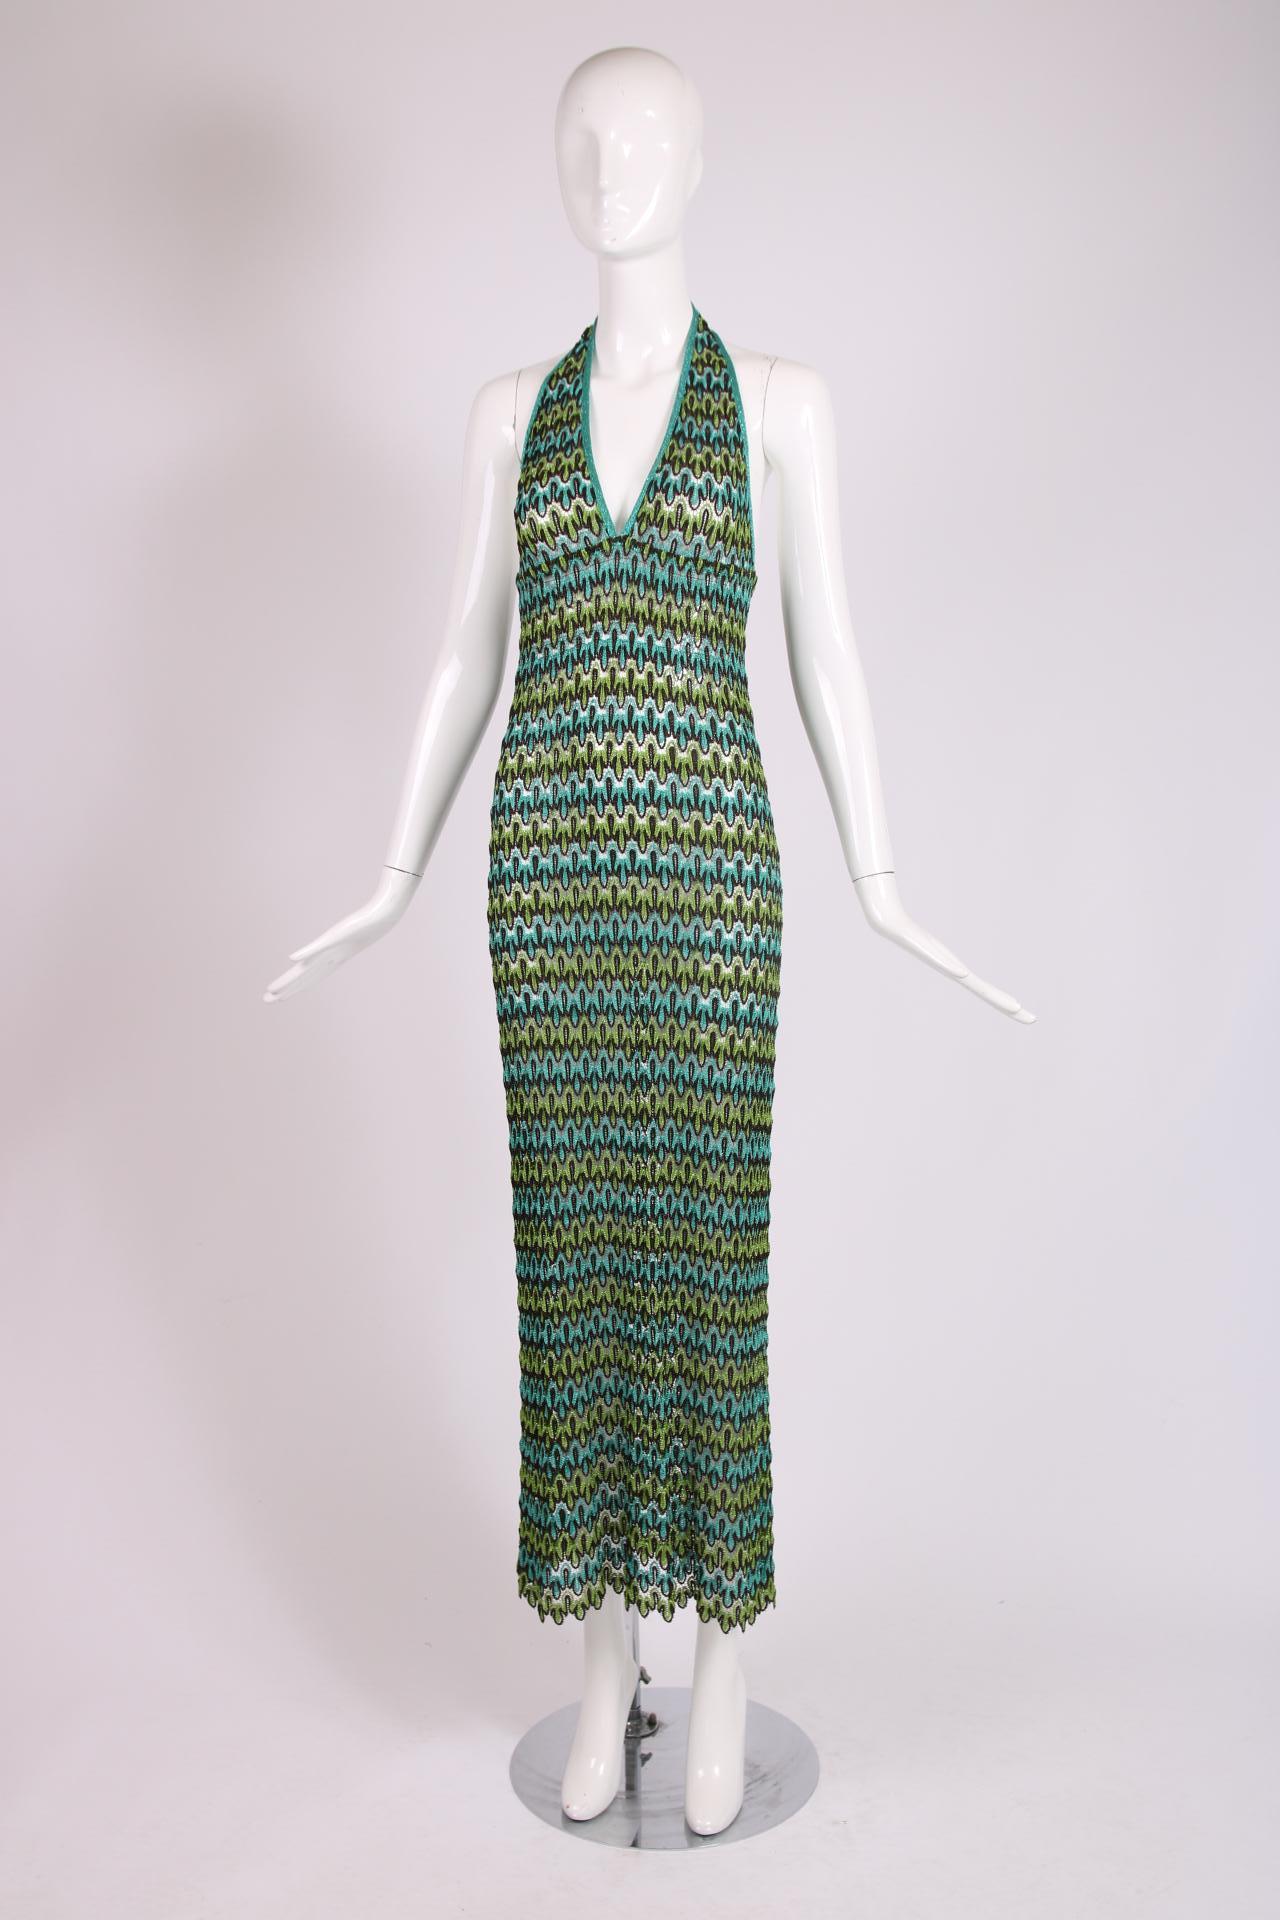 Missoni orange label green and blue metallic lurex knit maxi dress with a halter style top. Size 40 - in very good vintage condition. There is what appears to be an alteration at the back neck where the fabric ties have been taken in to shorten the